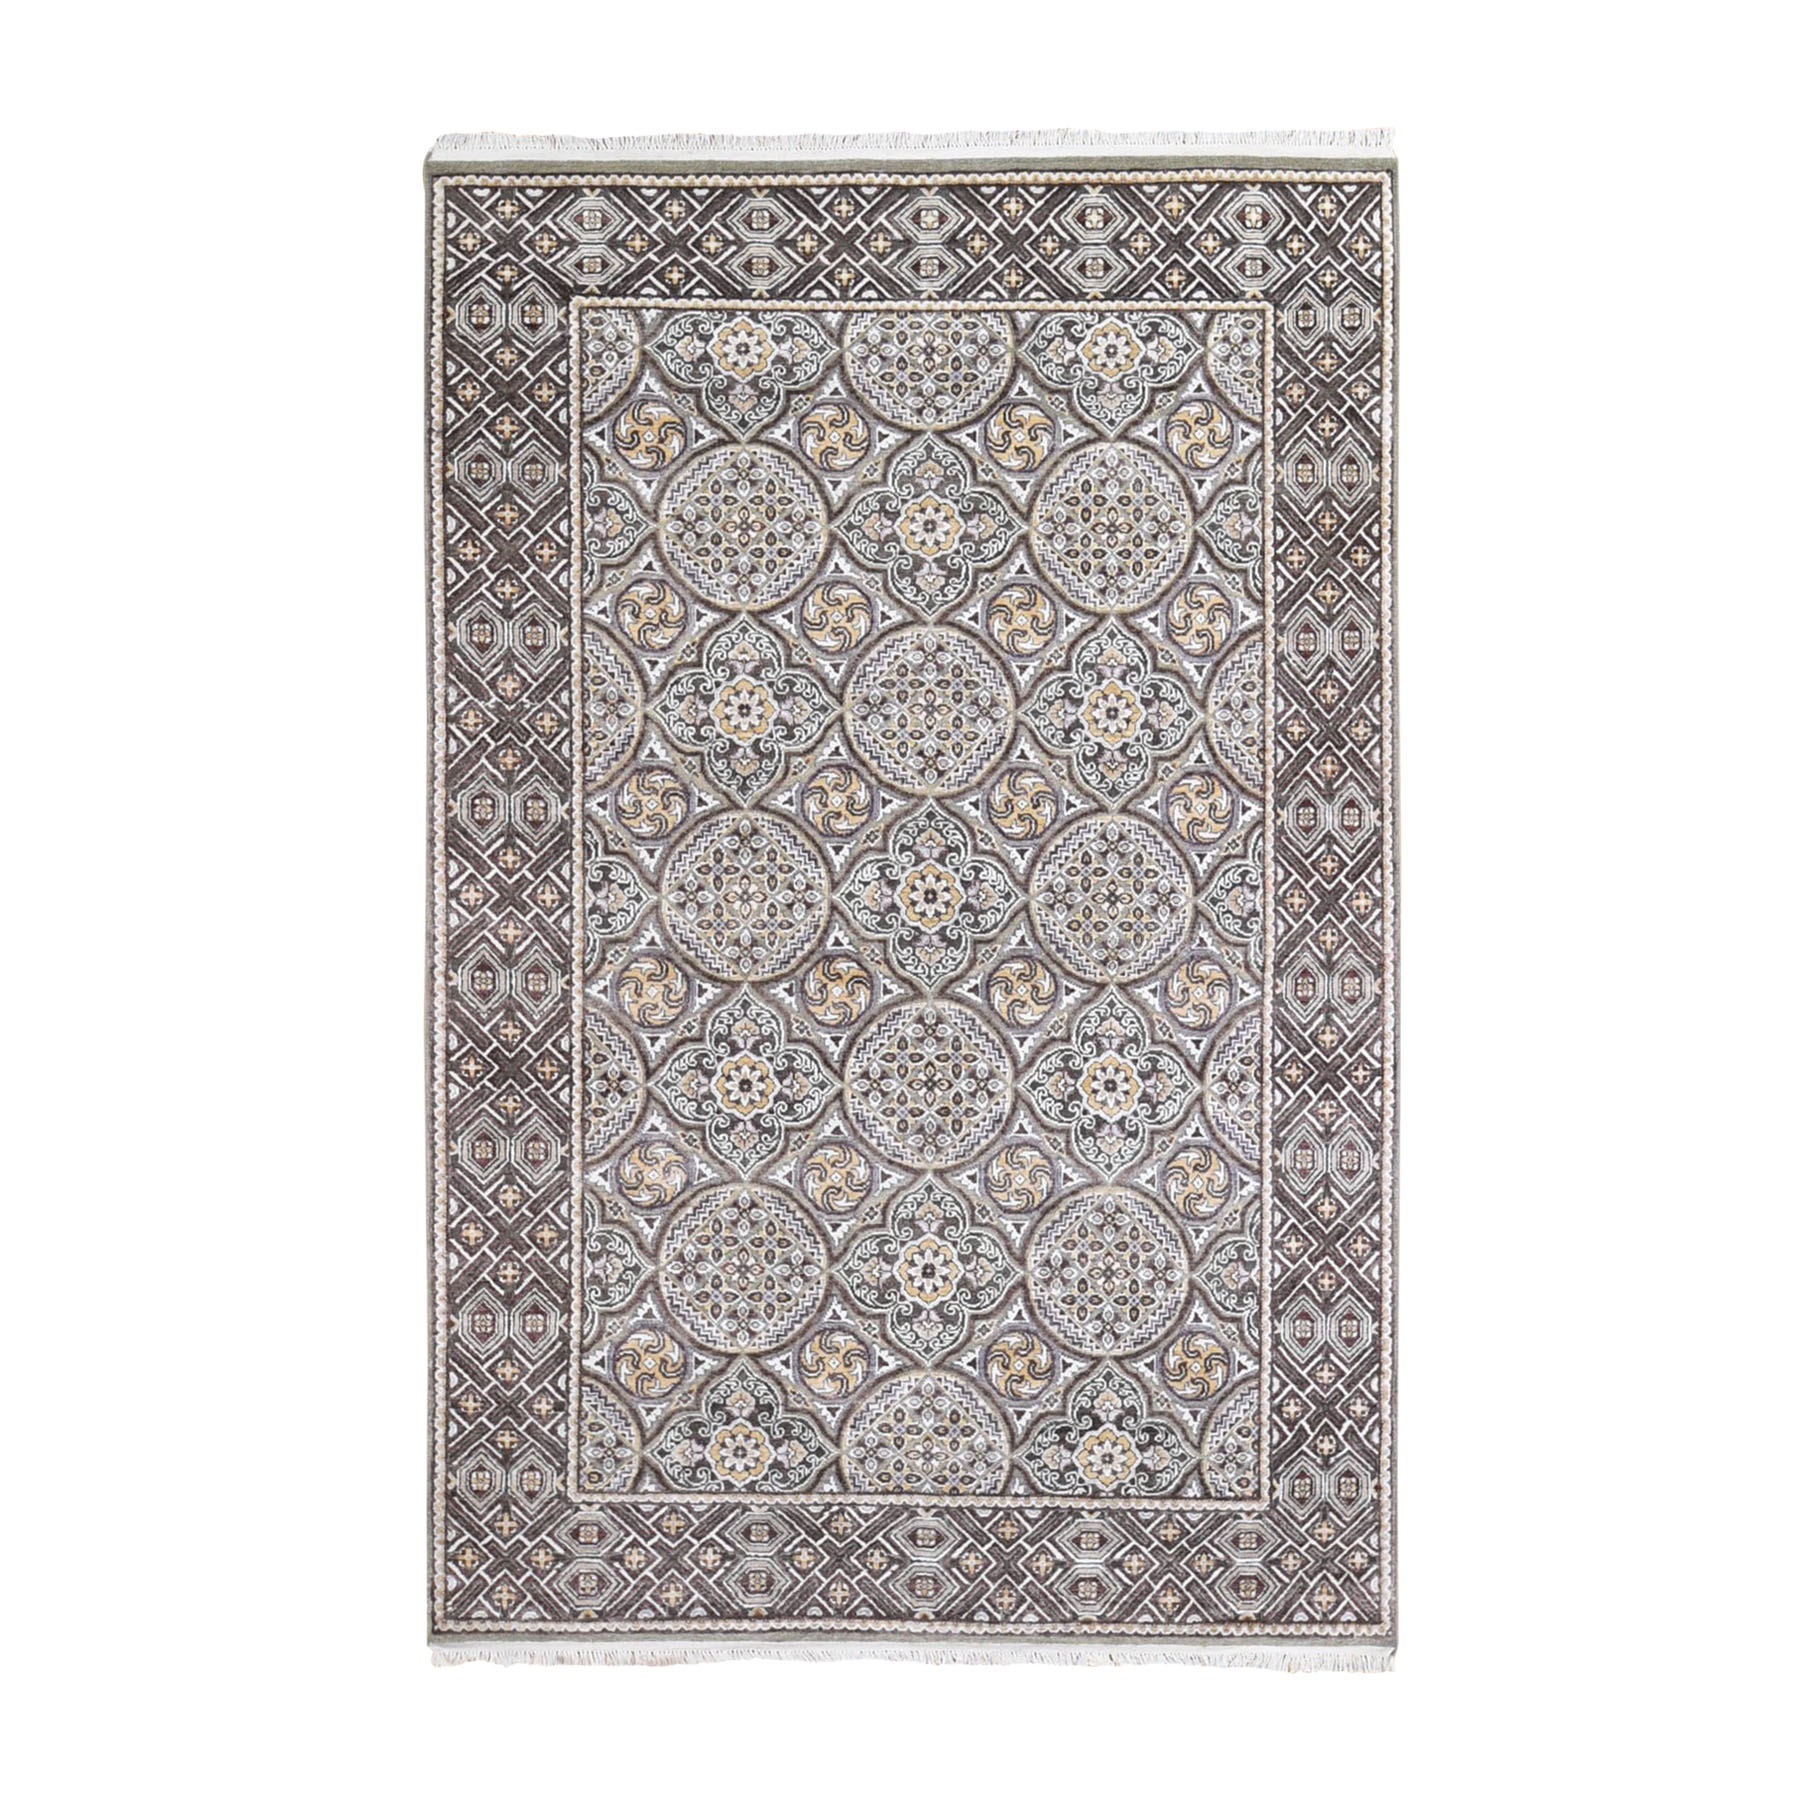 Transitional Silk Hand-Knotted Area Rug 6'2